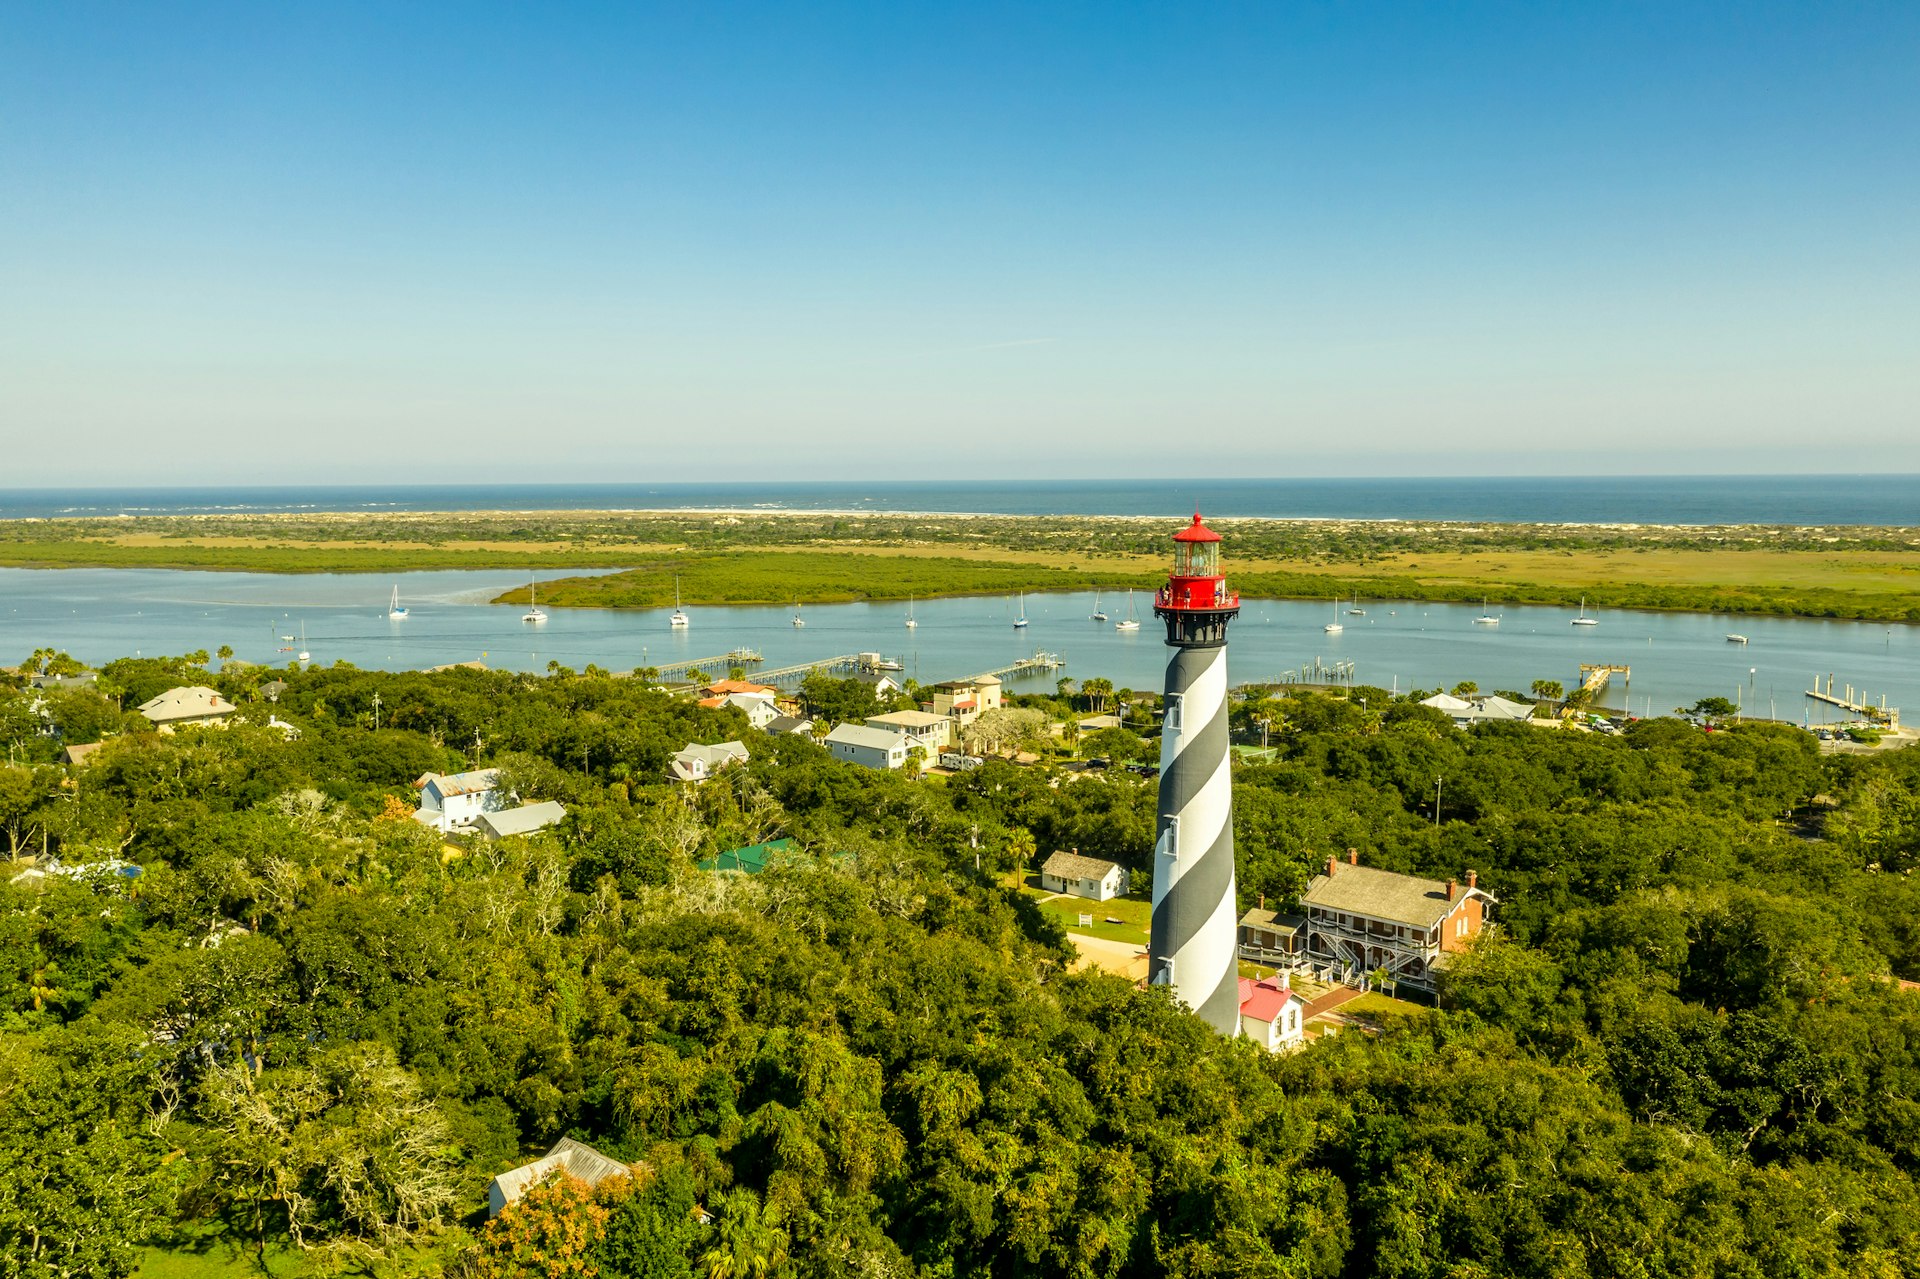 Aerial view of a black-and-white striped lighthouse. A peninsula in the distance covered in greenery gives way to a long stretch of golden sand